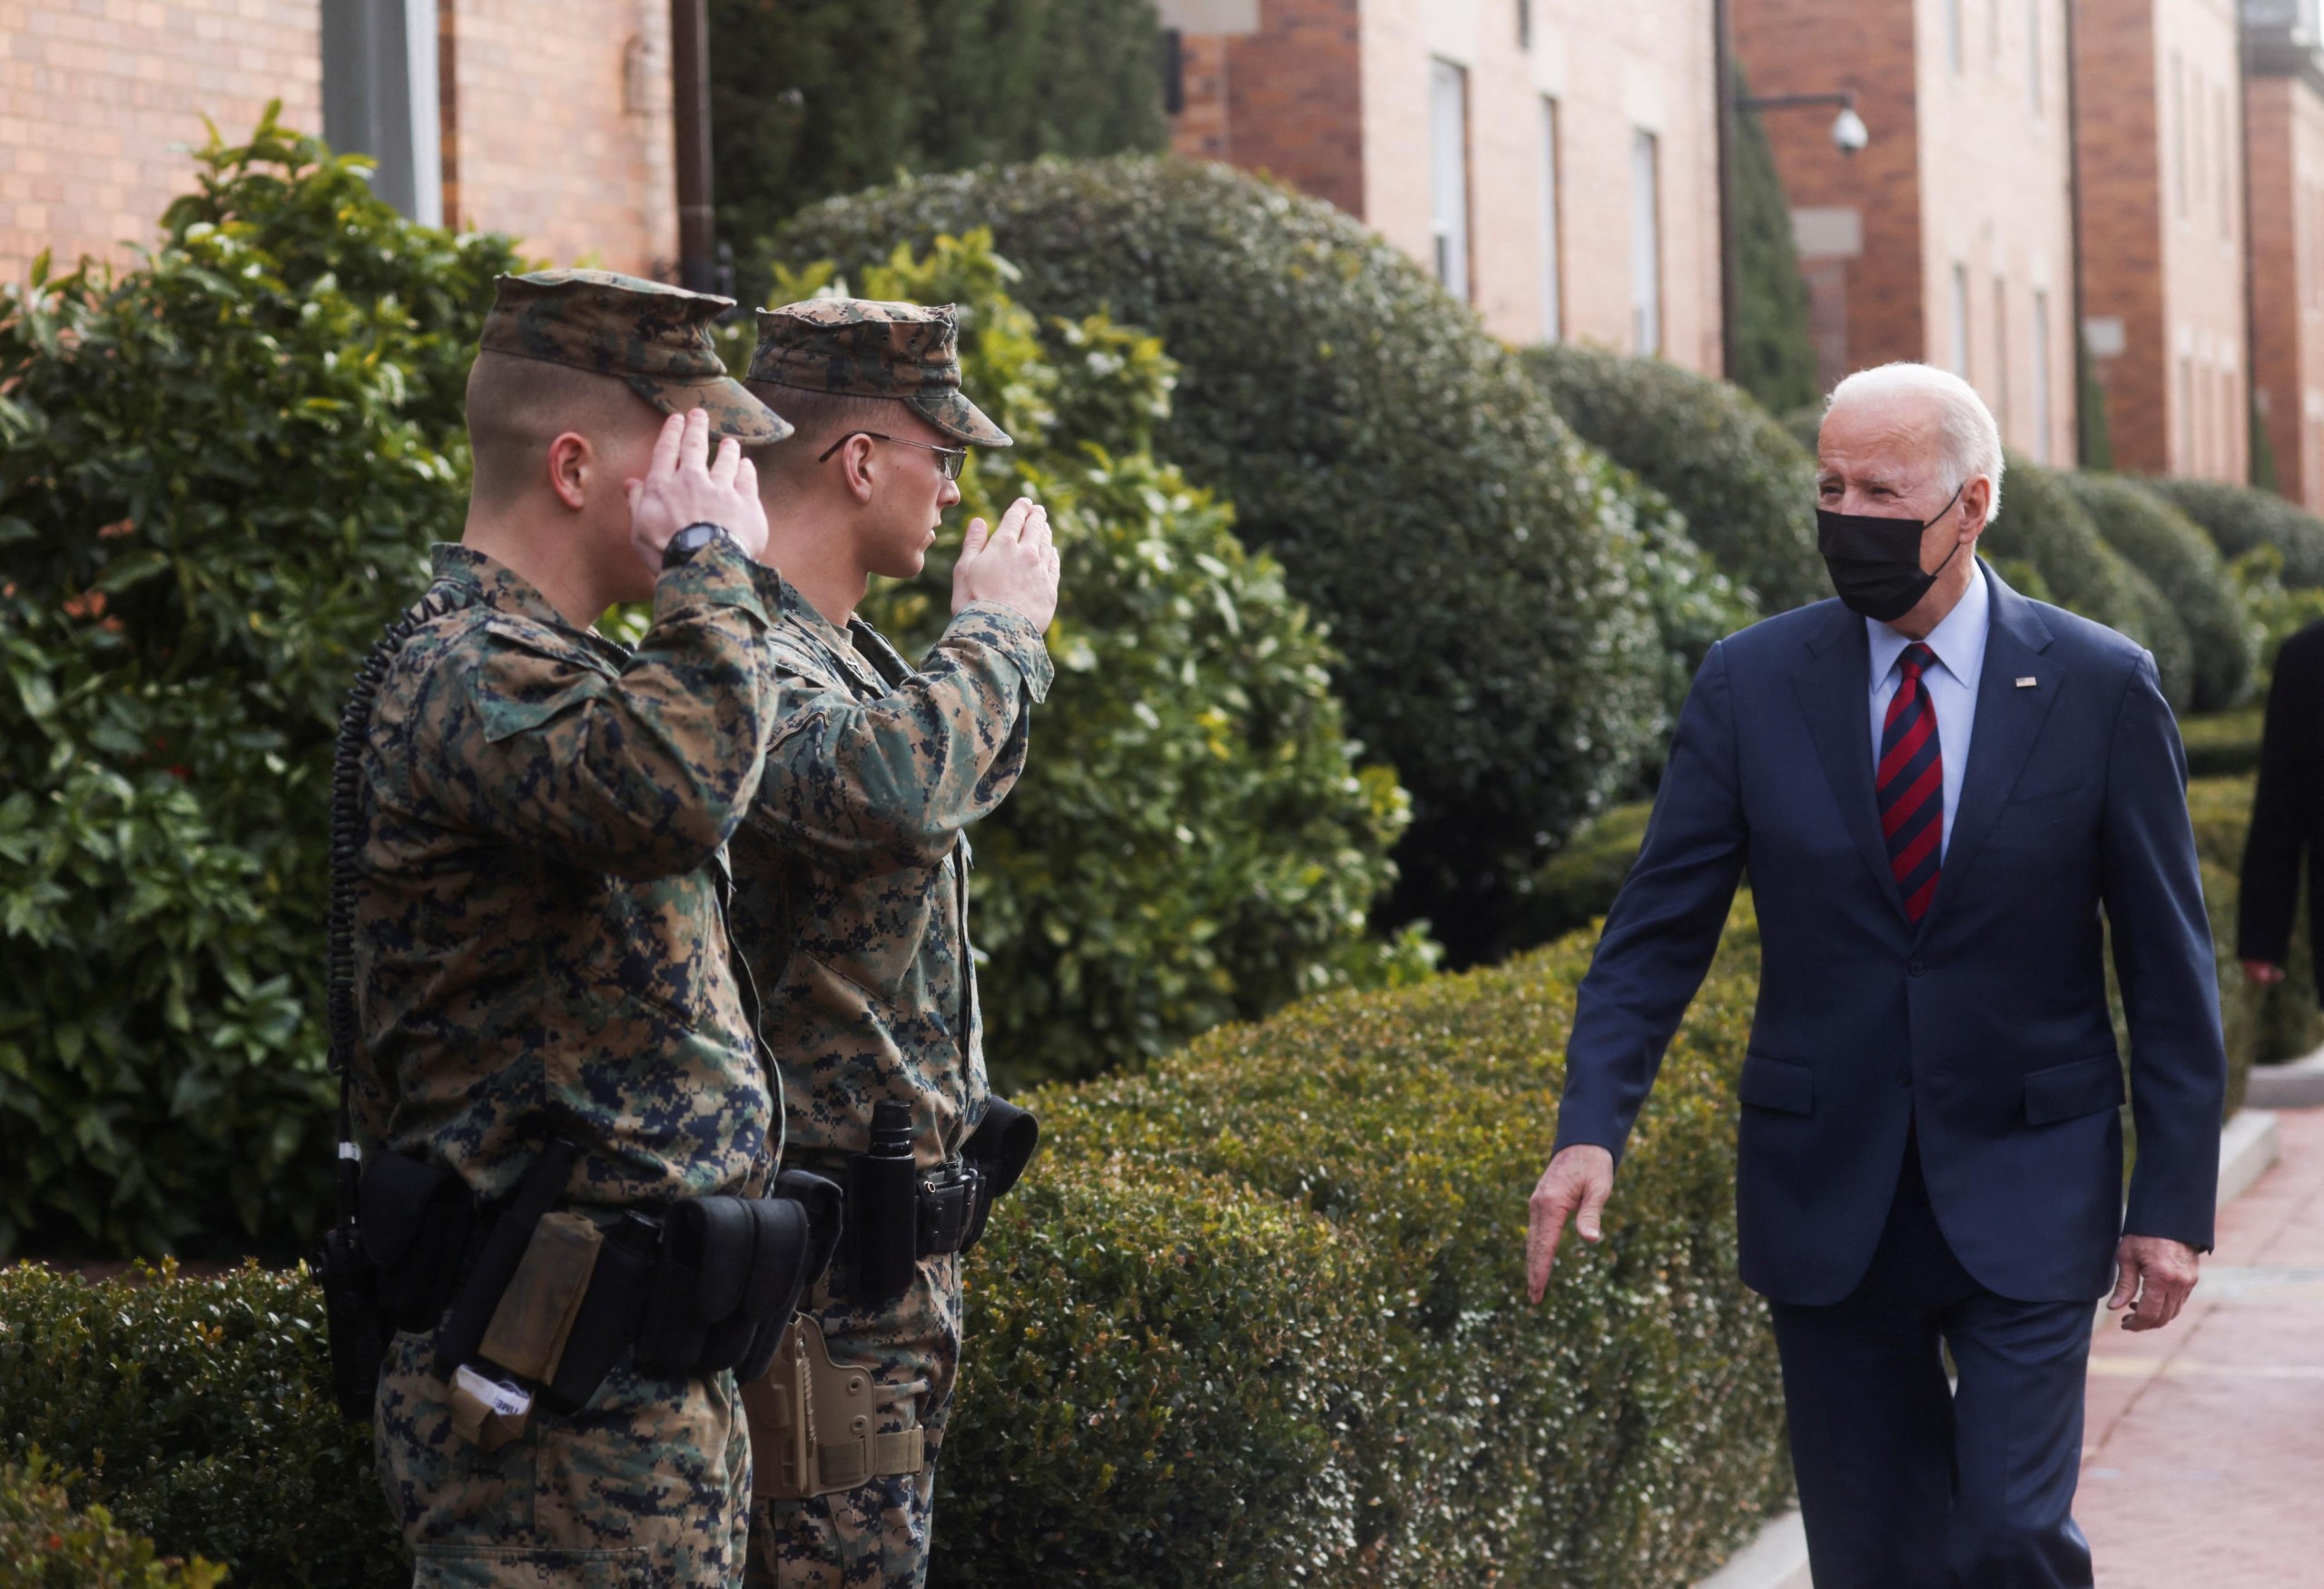 U.S. President Joe Biden is saluted by U.S. Marines on the street in front of their barracks as he visits small businesses along "Barracks Row" on Capitol Hill in Washington, U.S., January 25, 2022. REUTERS/Leah Millis Photo: LEAH MILLIS/REUTERS